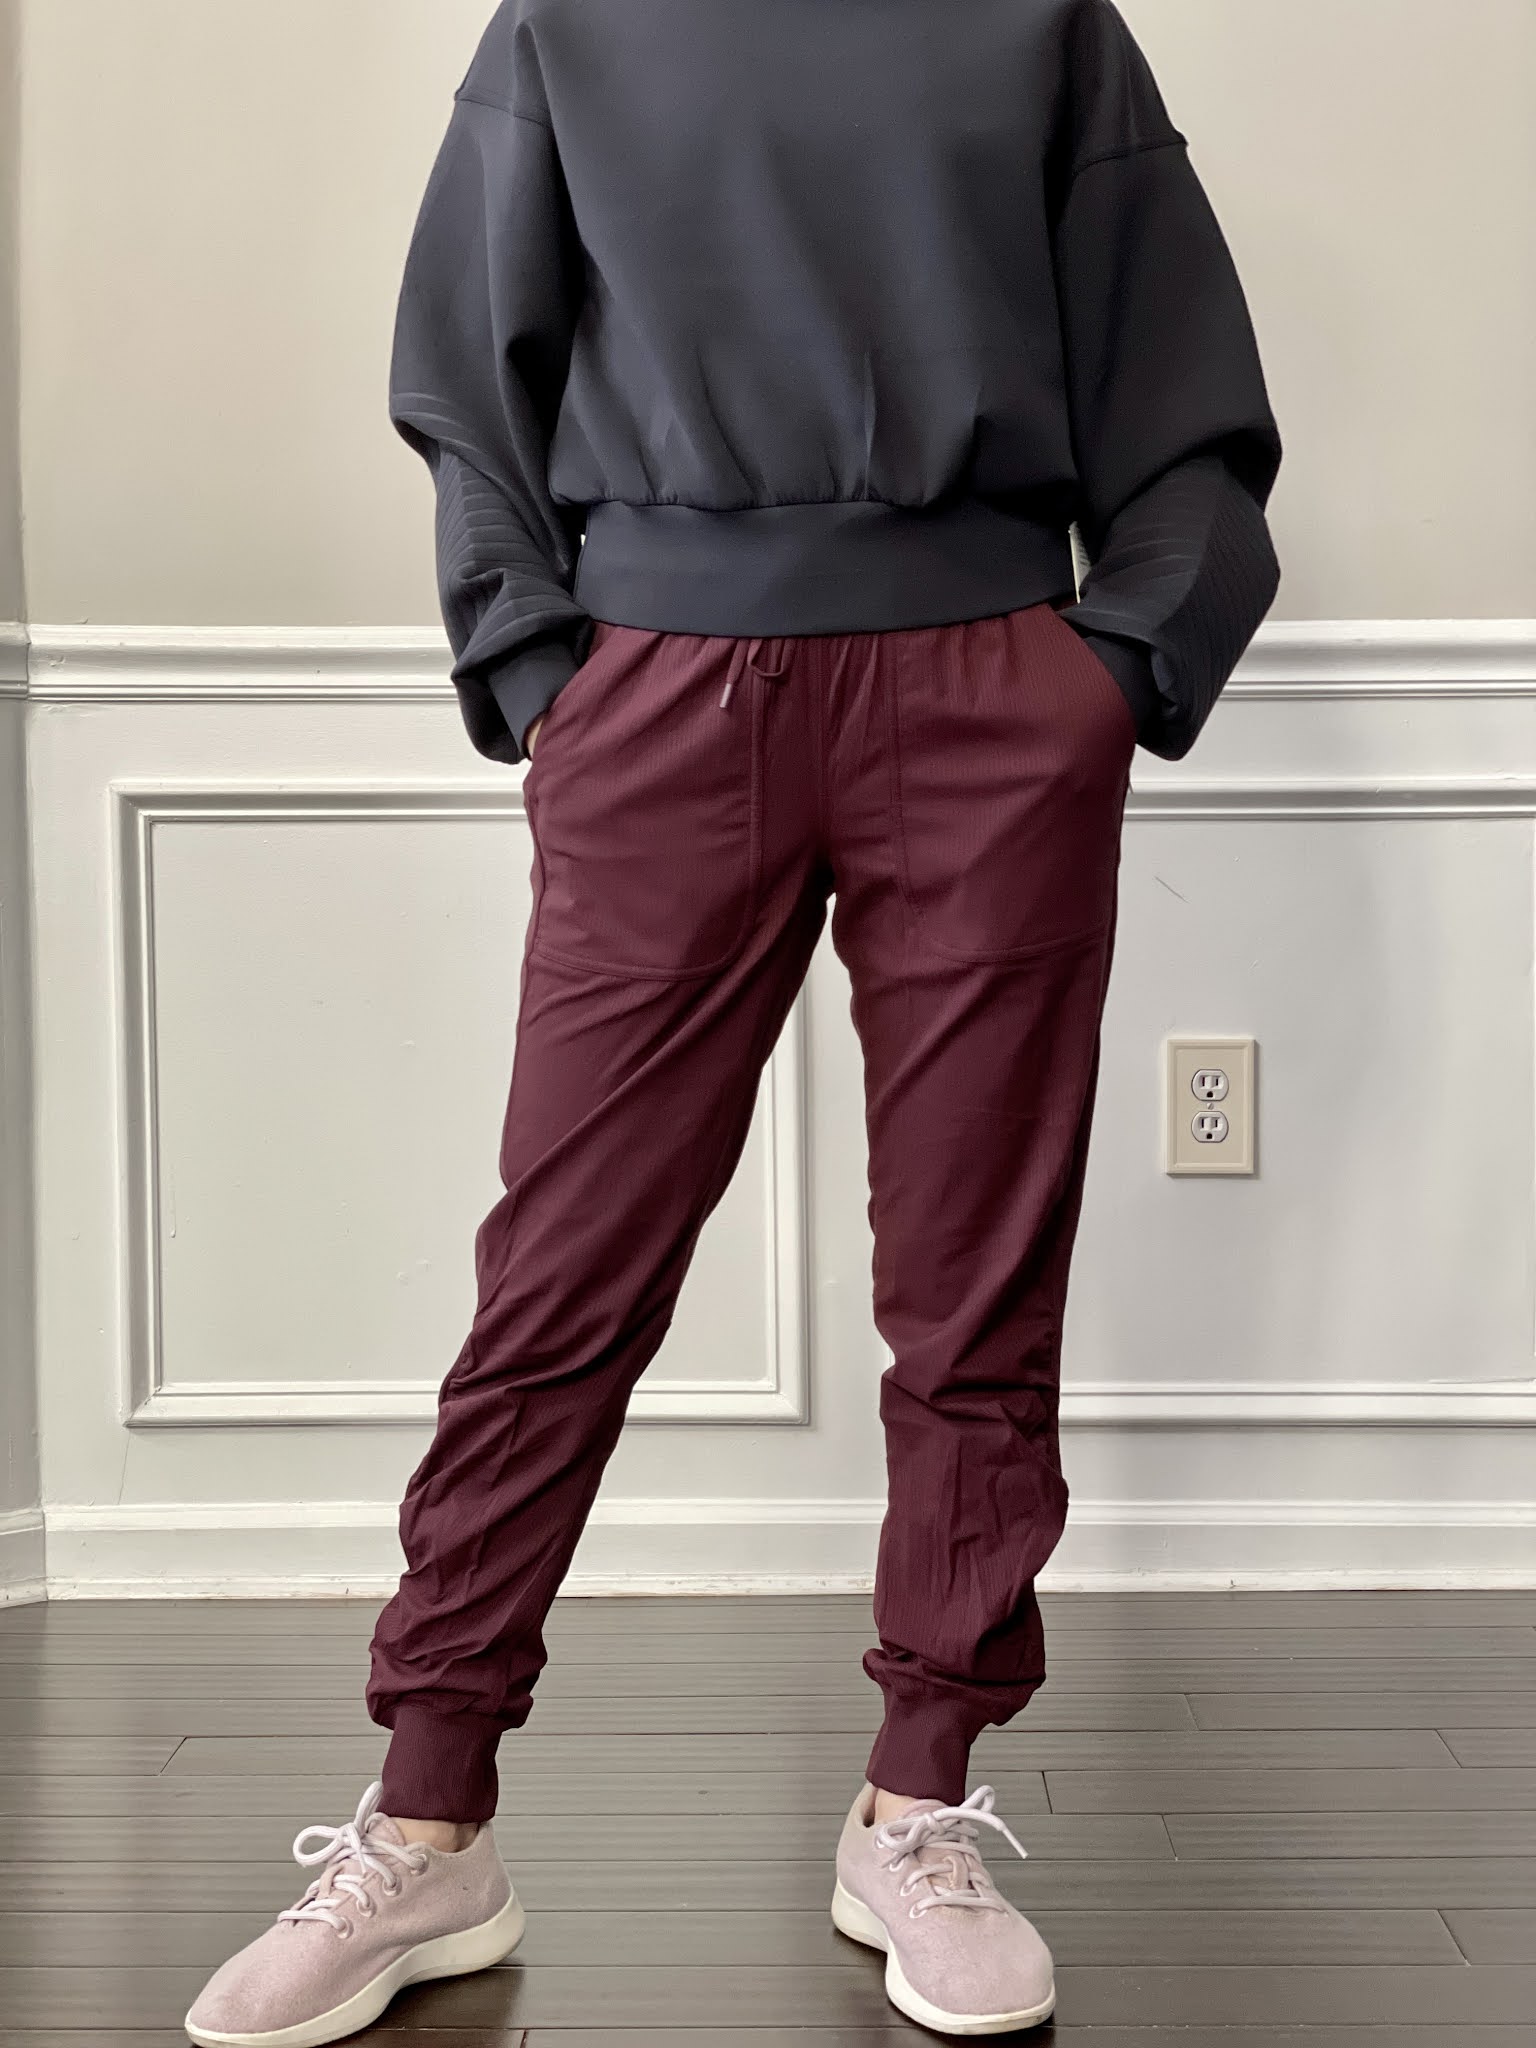 Fit Review Friday! Beyond The Studio 7/8 Jogger & Full Flourish Pullover